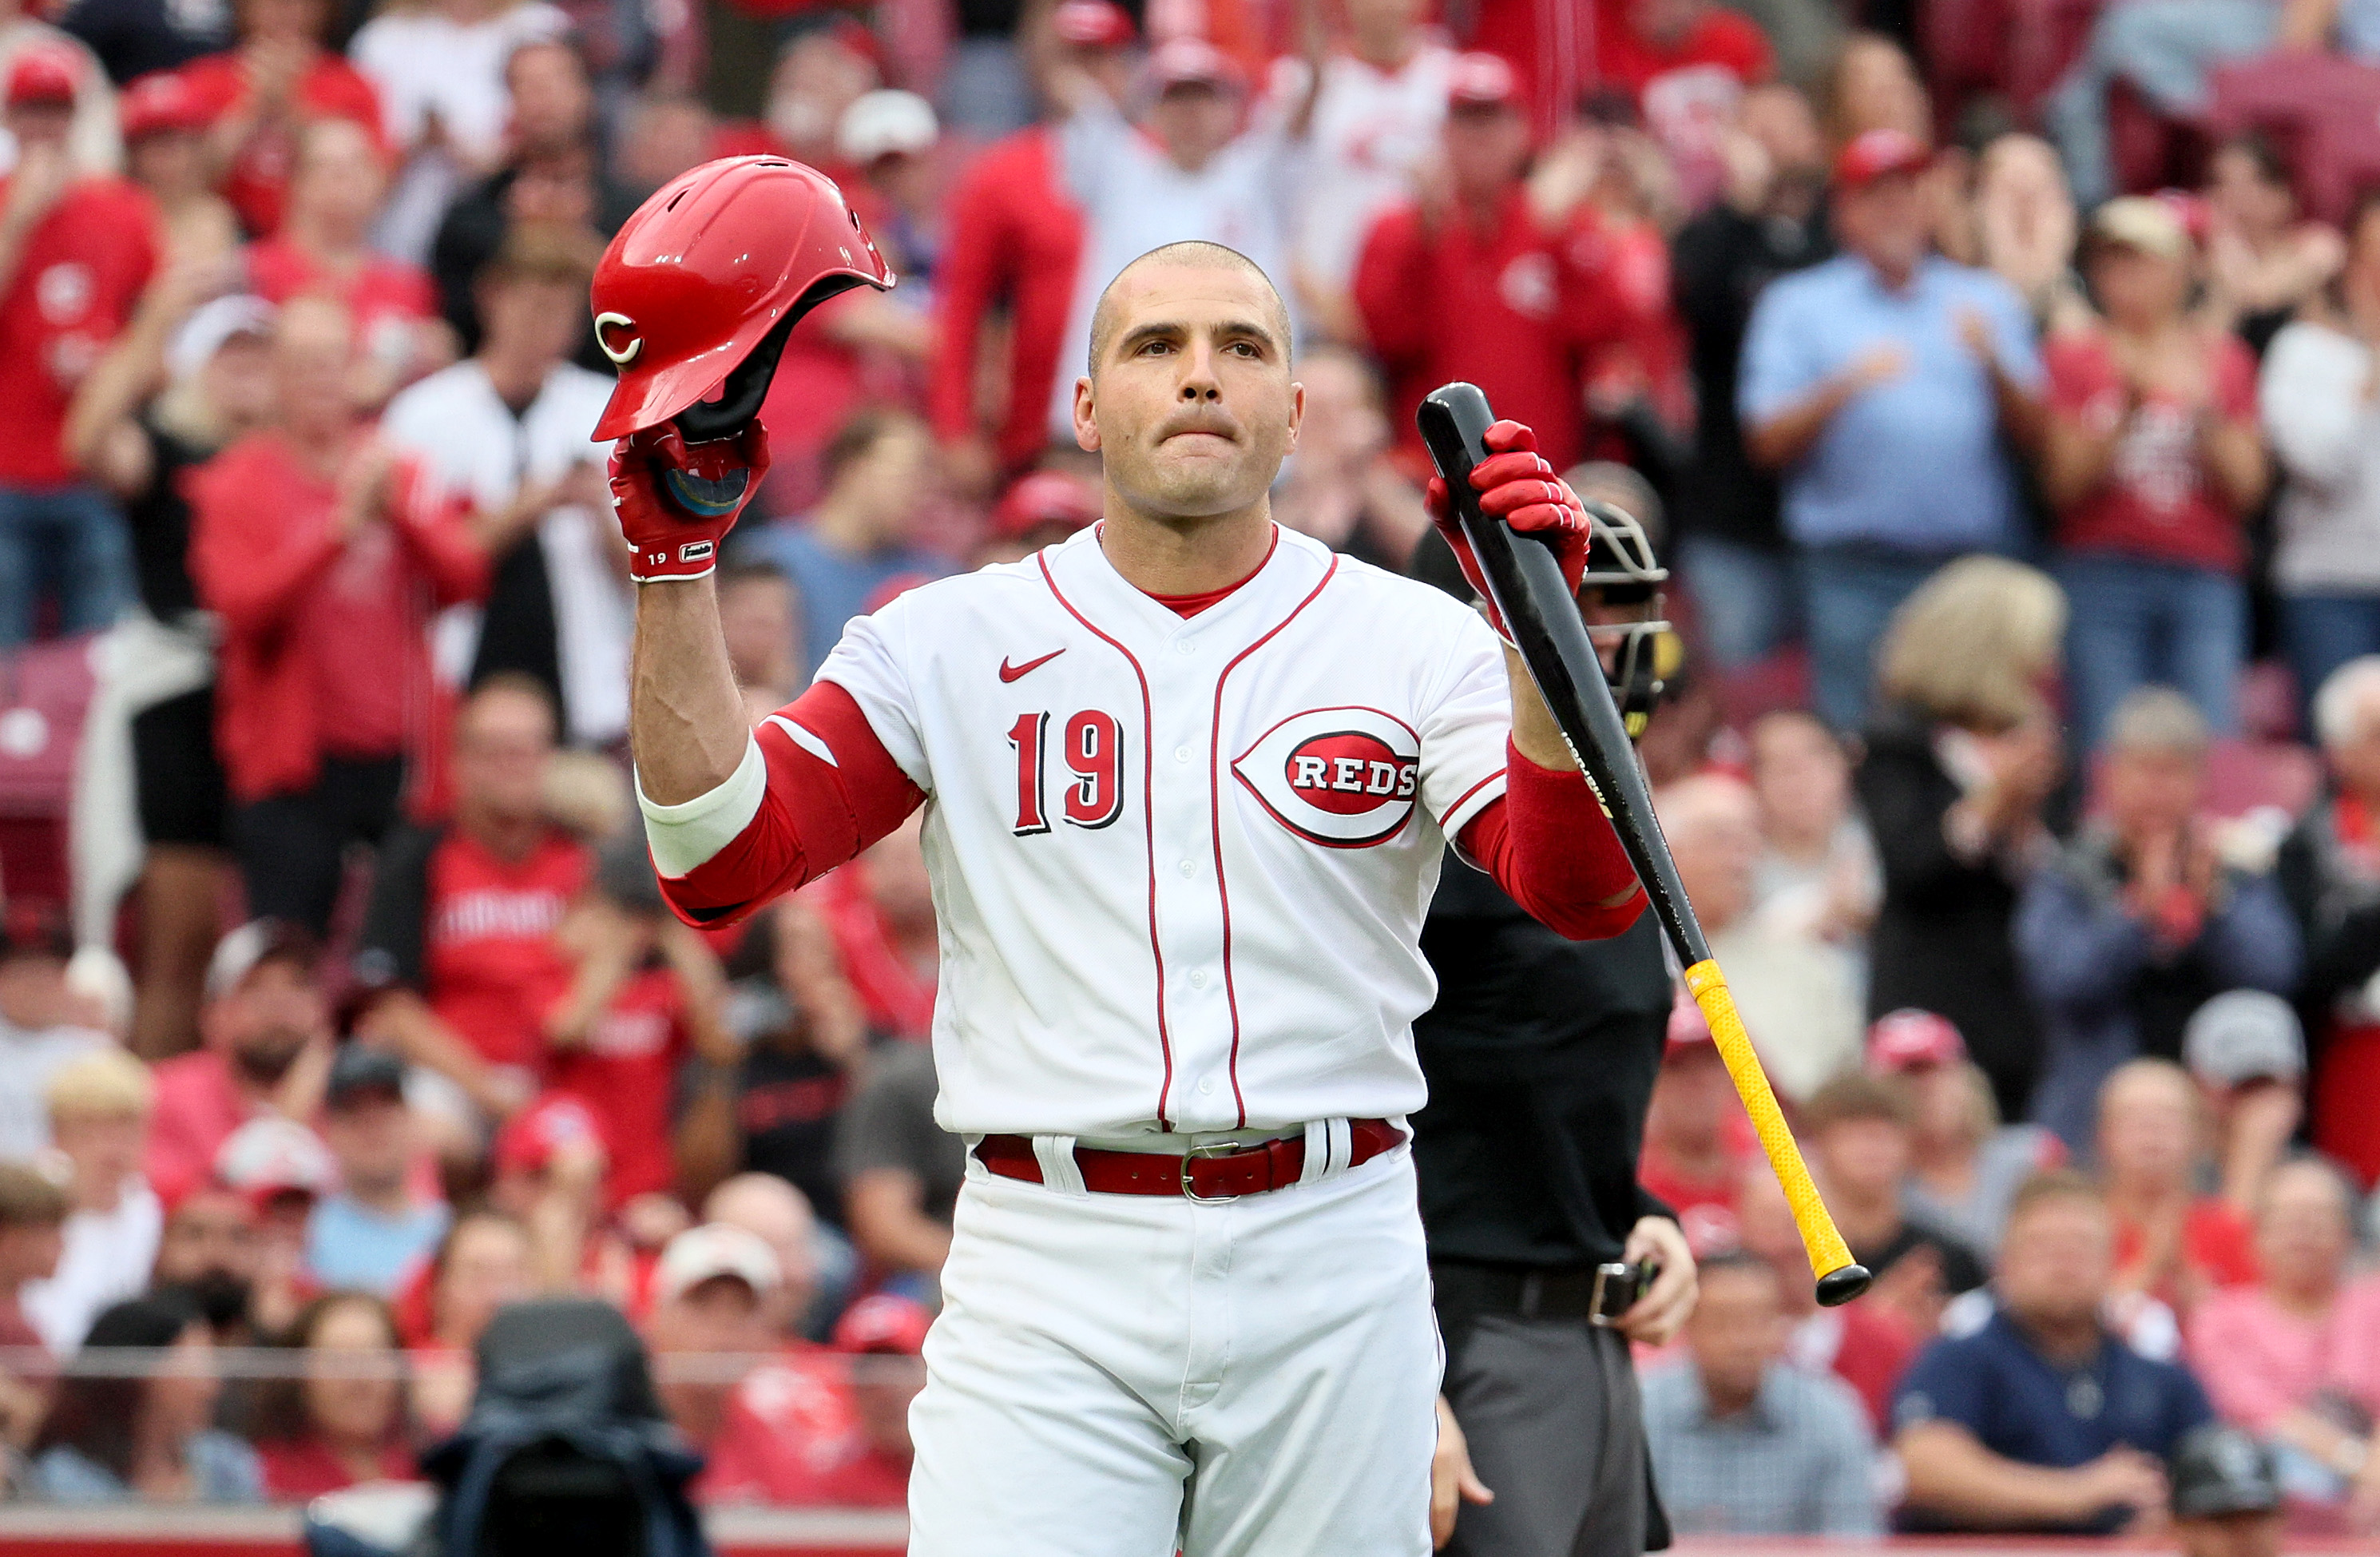 Joey Votto returned, knocked the crap out of a ball - Red Reporter